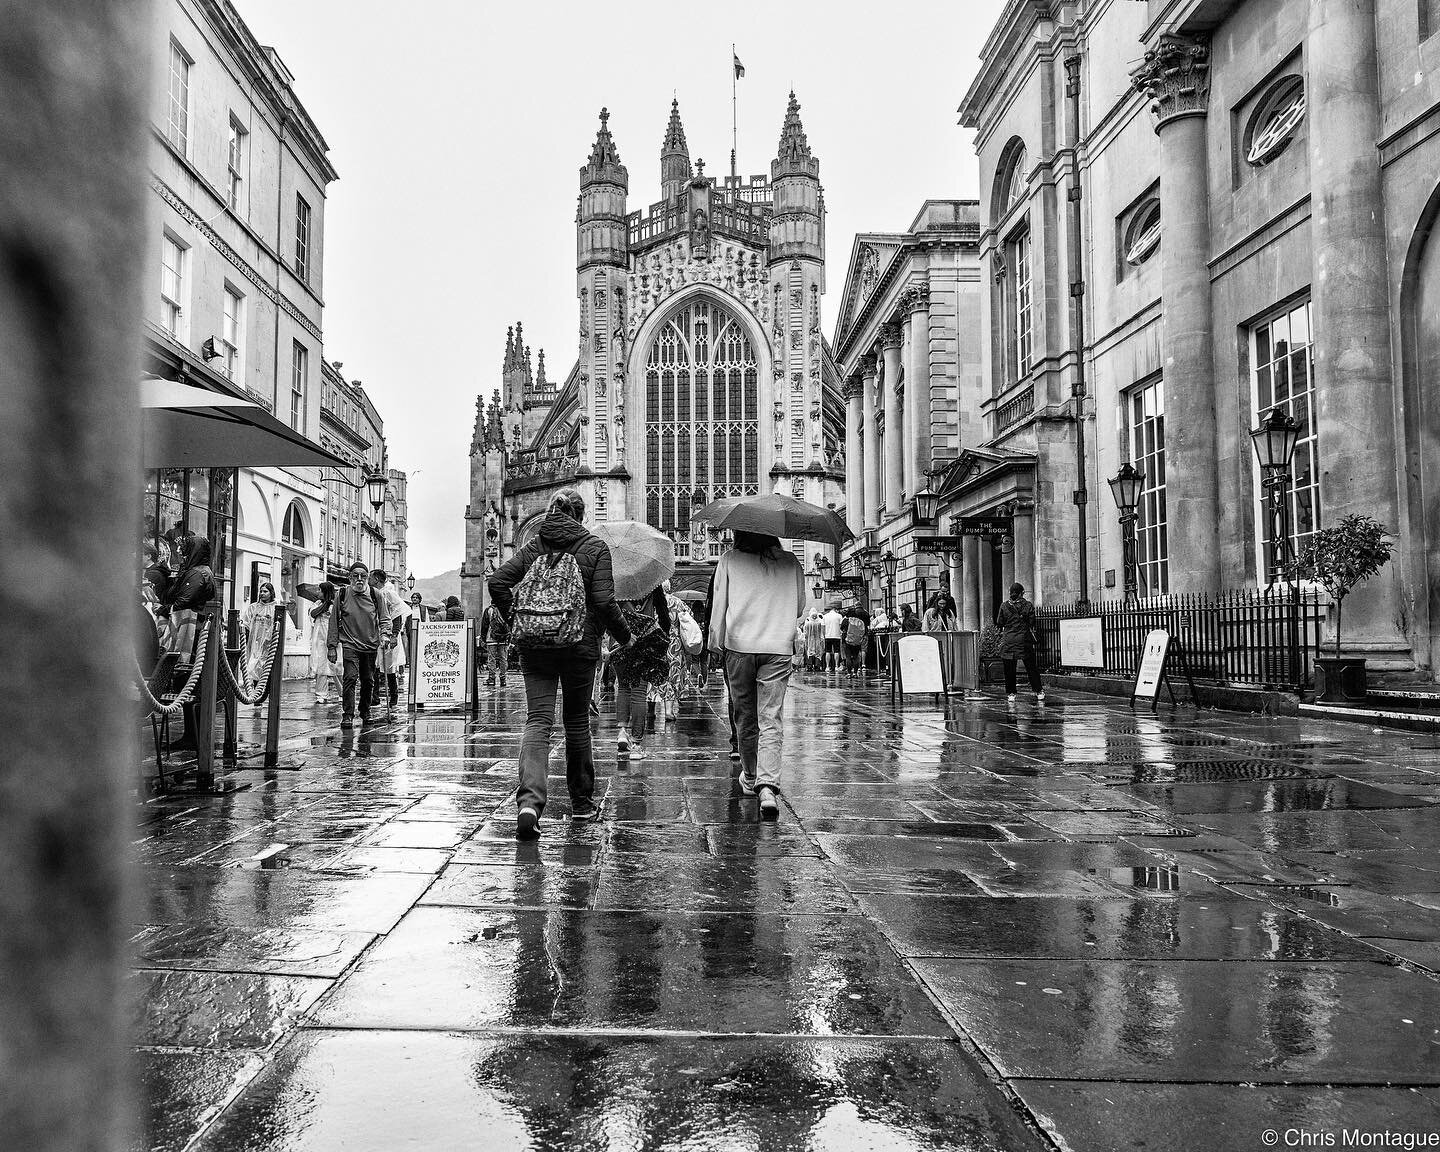 Politely wishing for rainy days&hellip;
&bull;
For the non-Brits here, it is a well known tradition that we like to discuss the weather&hellip; a lot. So before you think I&rsquo;m going to say something negative, to be clear we are not a fussy lot, 